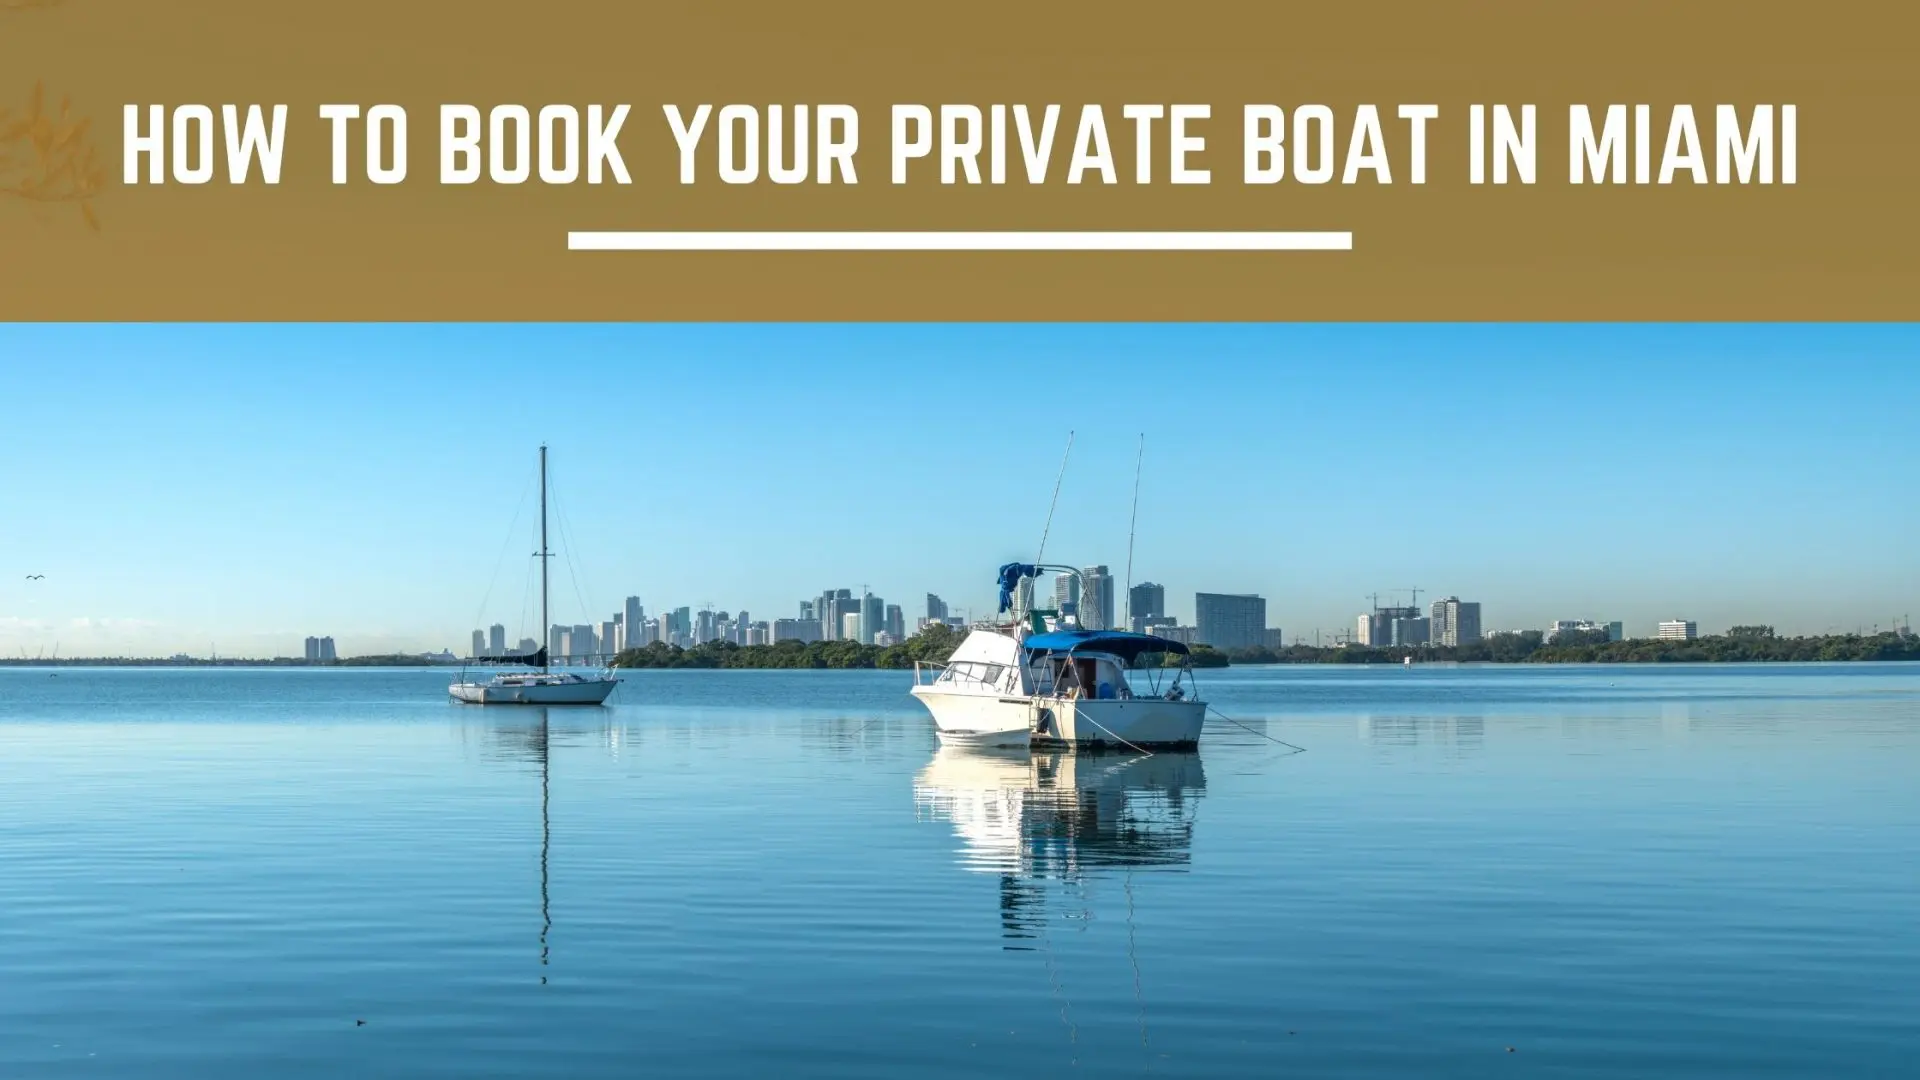 How To Book Your Private Boat In Miami